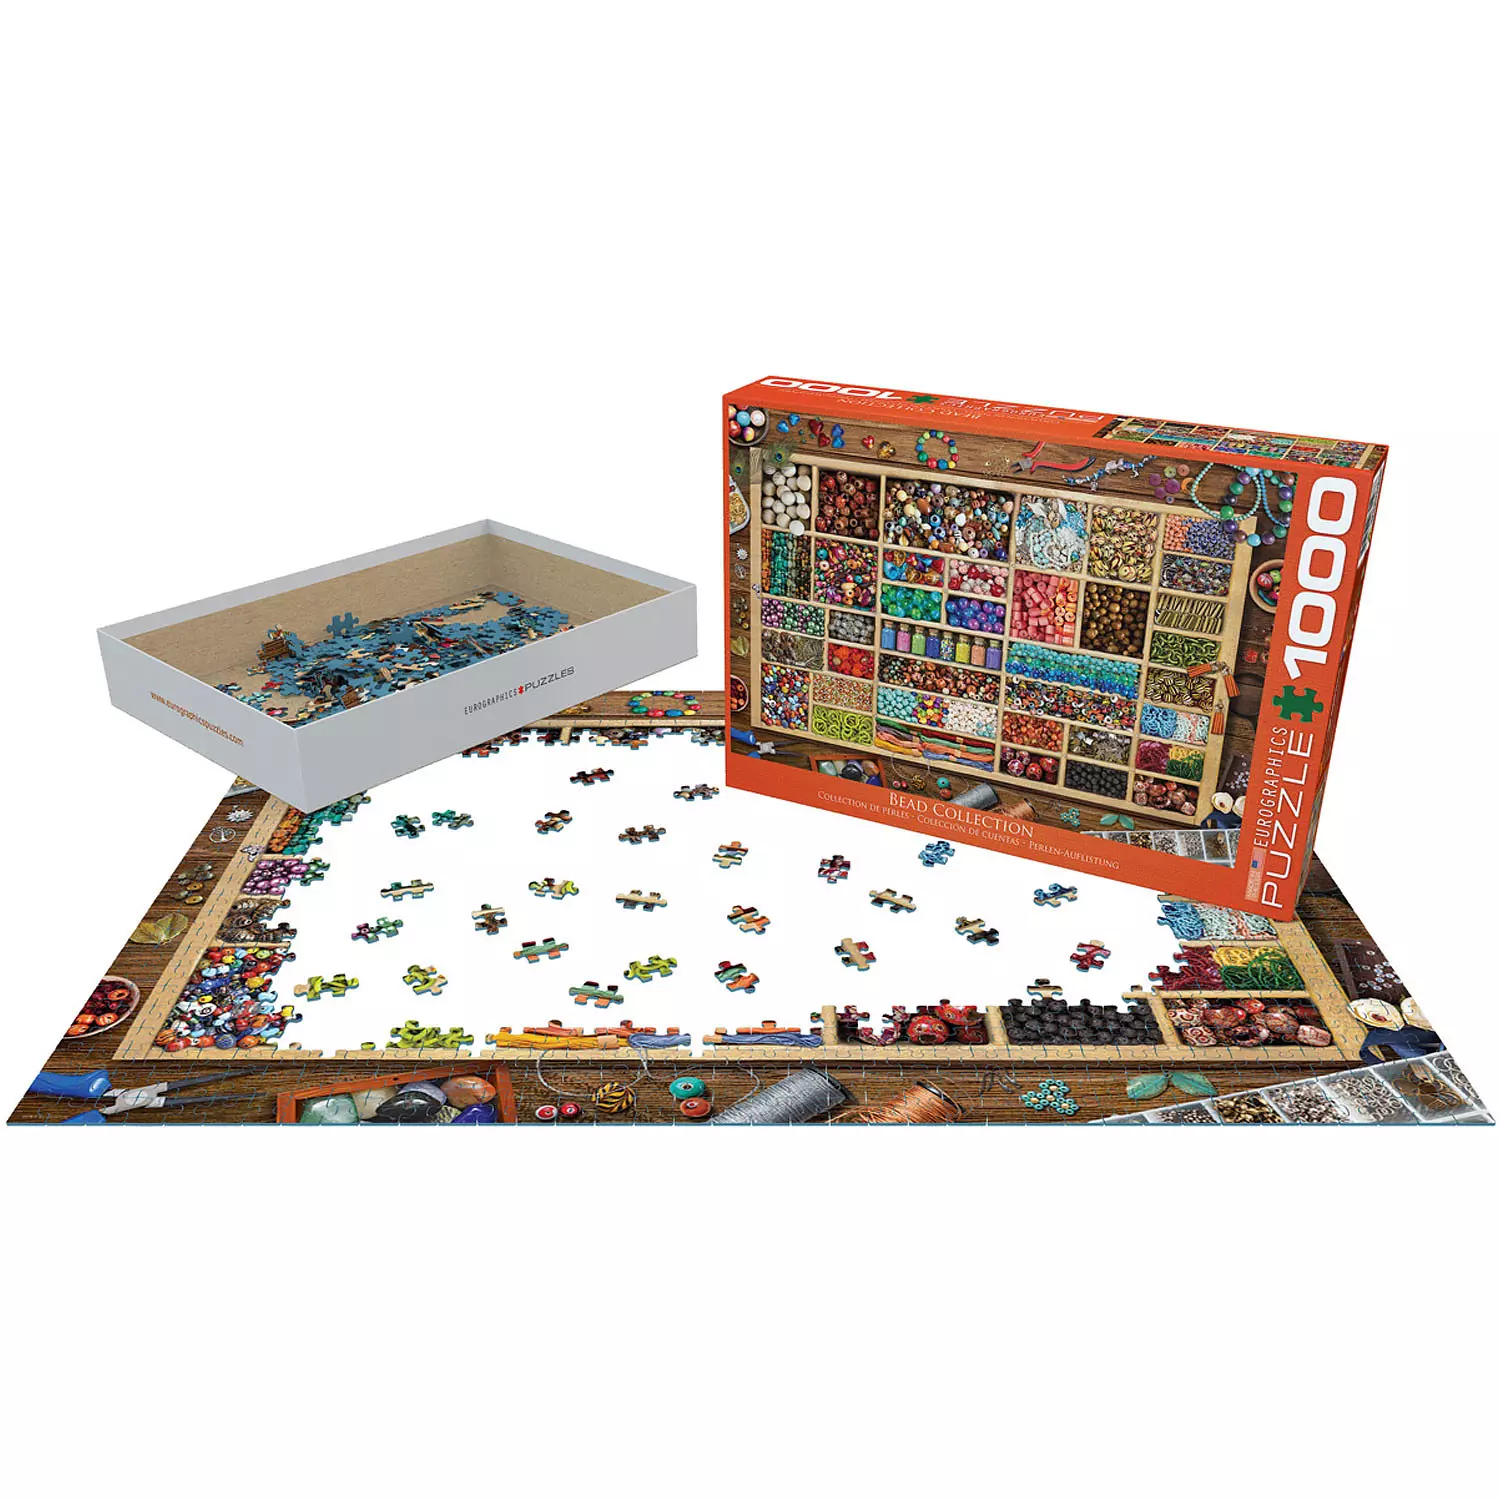 Eurographics - Puzzle, Beed collection, 1000 pcs